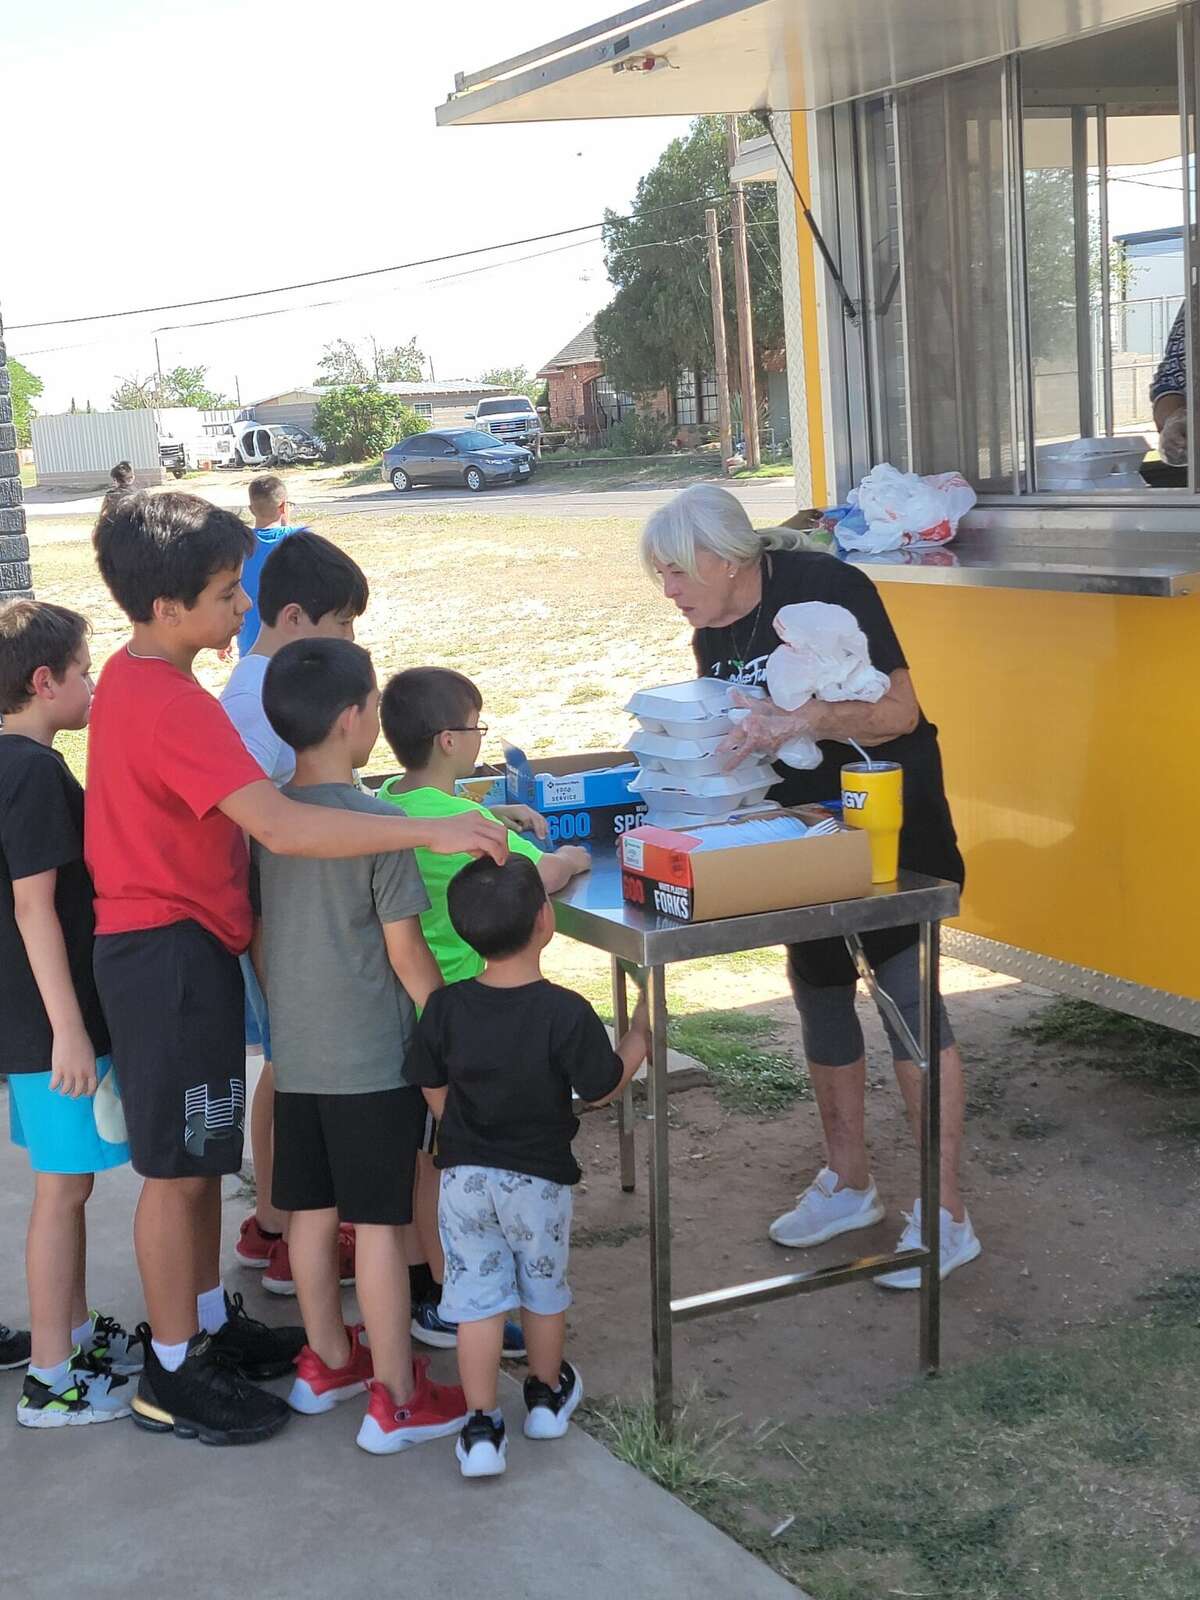 Rope Youth's Summer Feed and Read schedule continues through July 29 